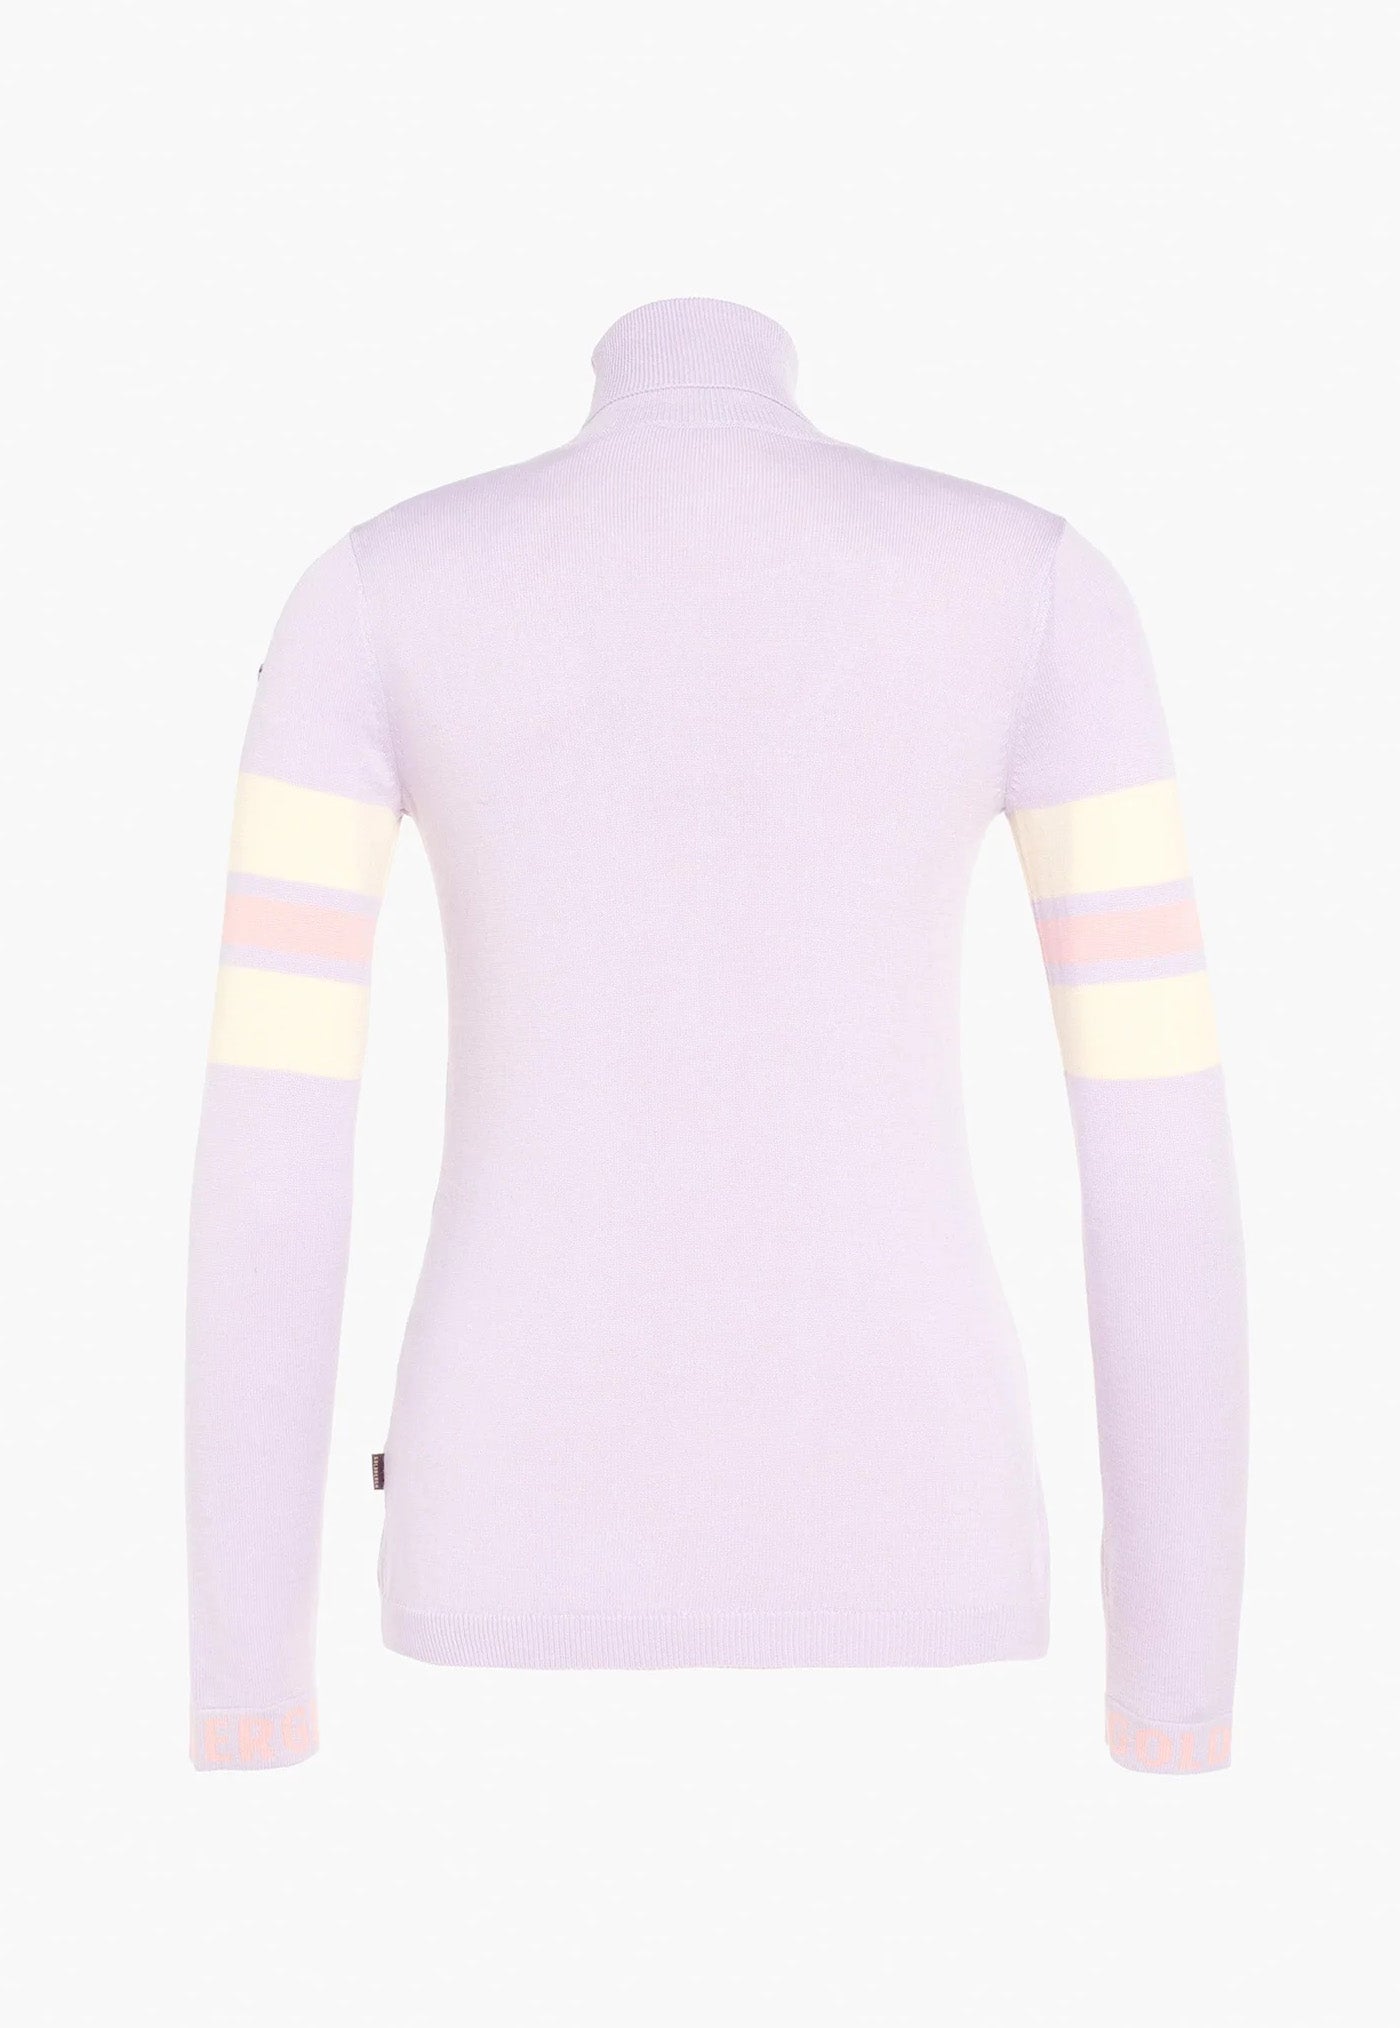 Biscuit Long Sleeve Knit Sweater - Sweet Lilac sold by Angel Divine